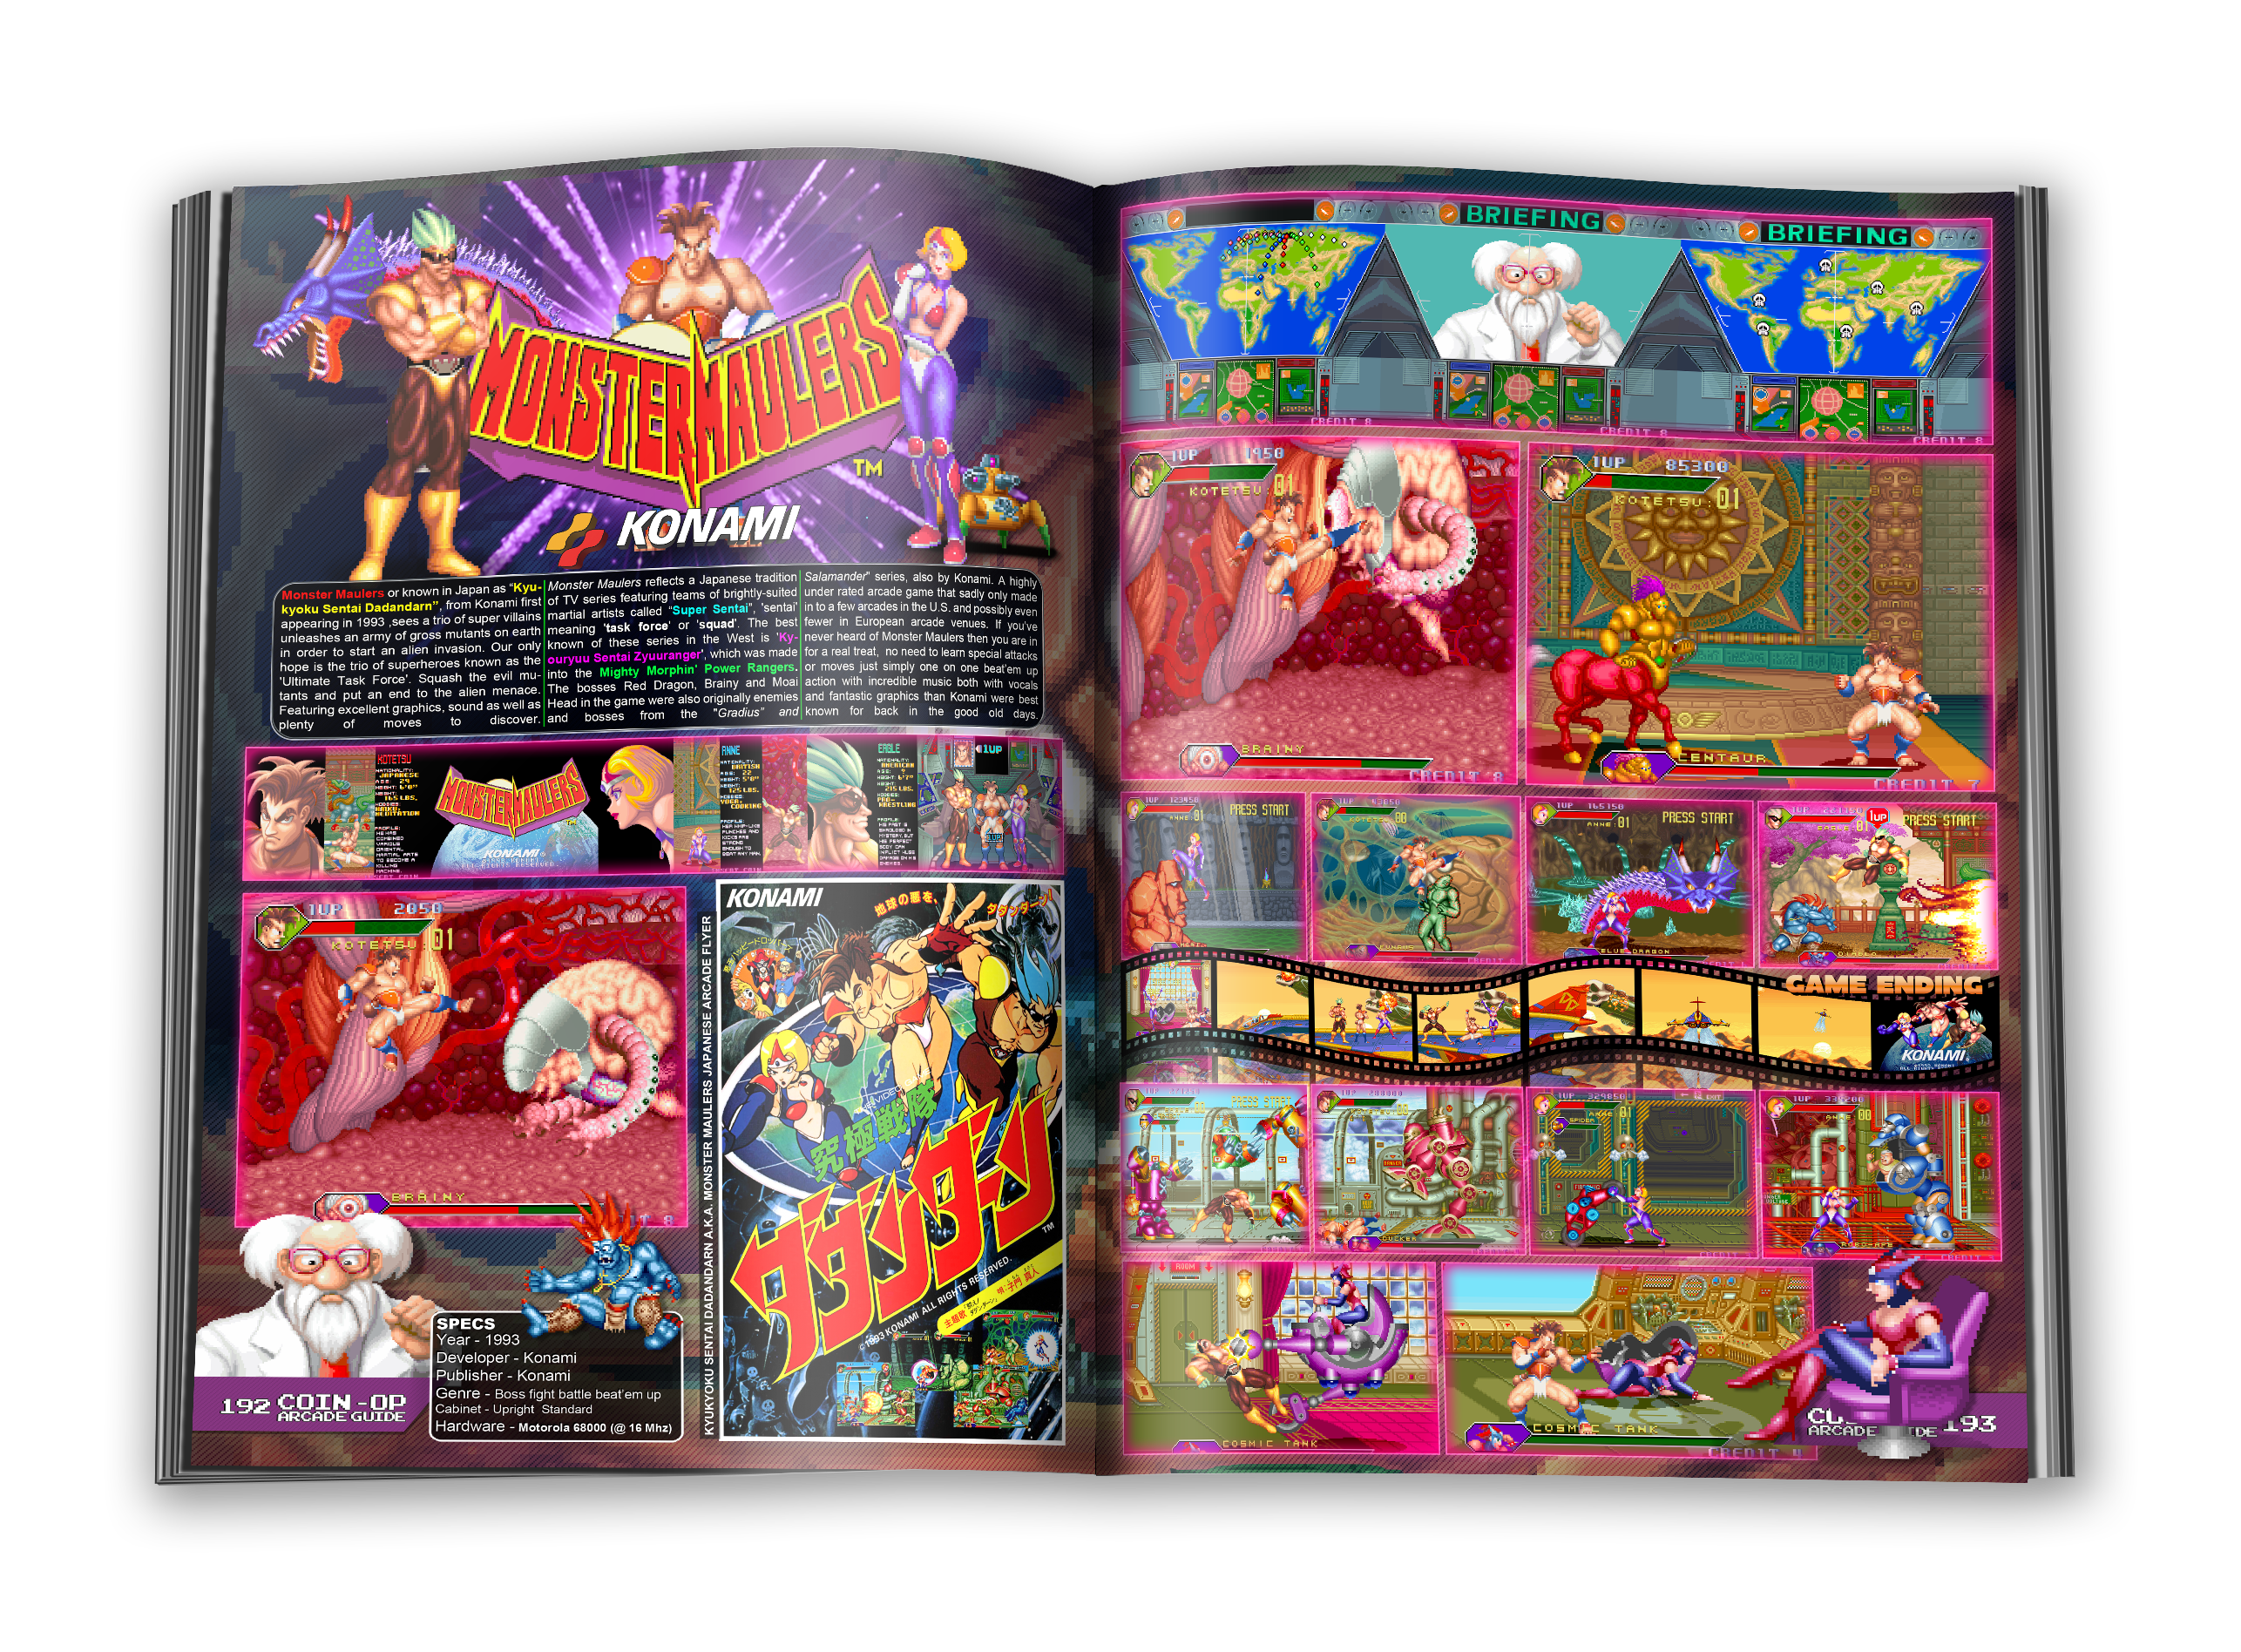 Now this looks like my kind of brawler. And look at all the colorful pages.